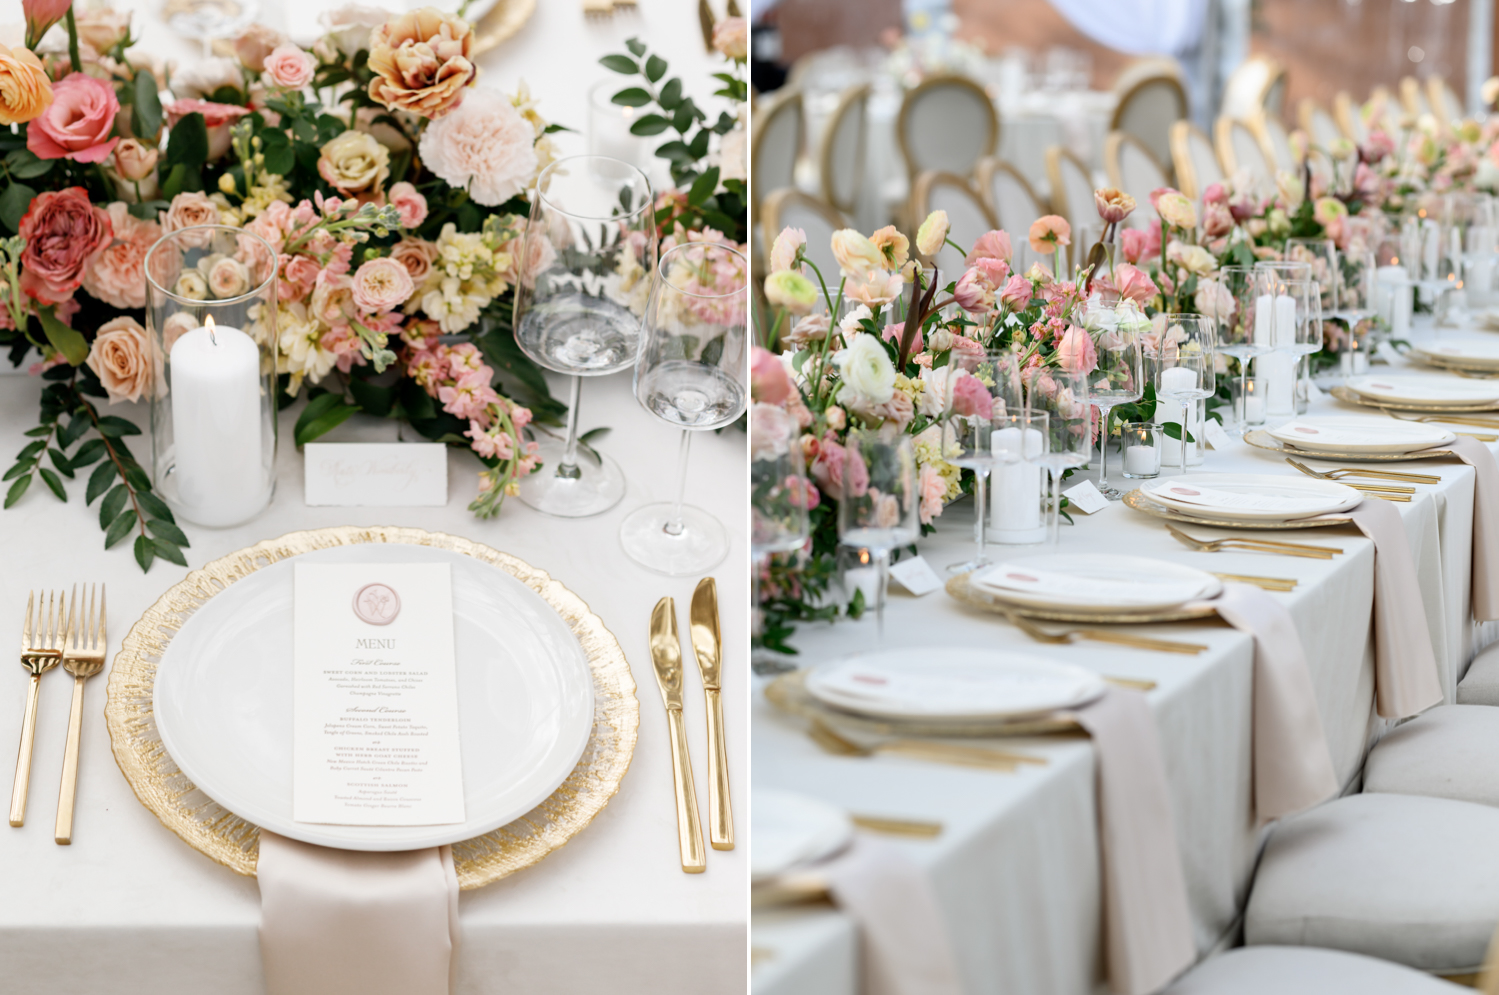 pastel floral centerpieces line the table at the reception 